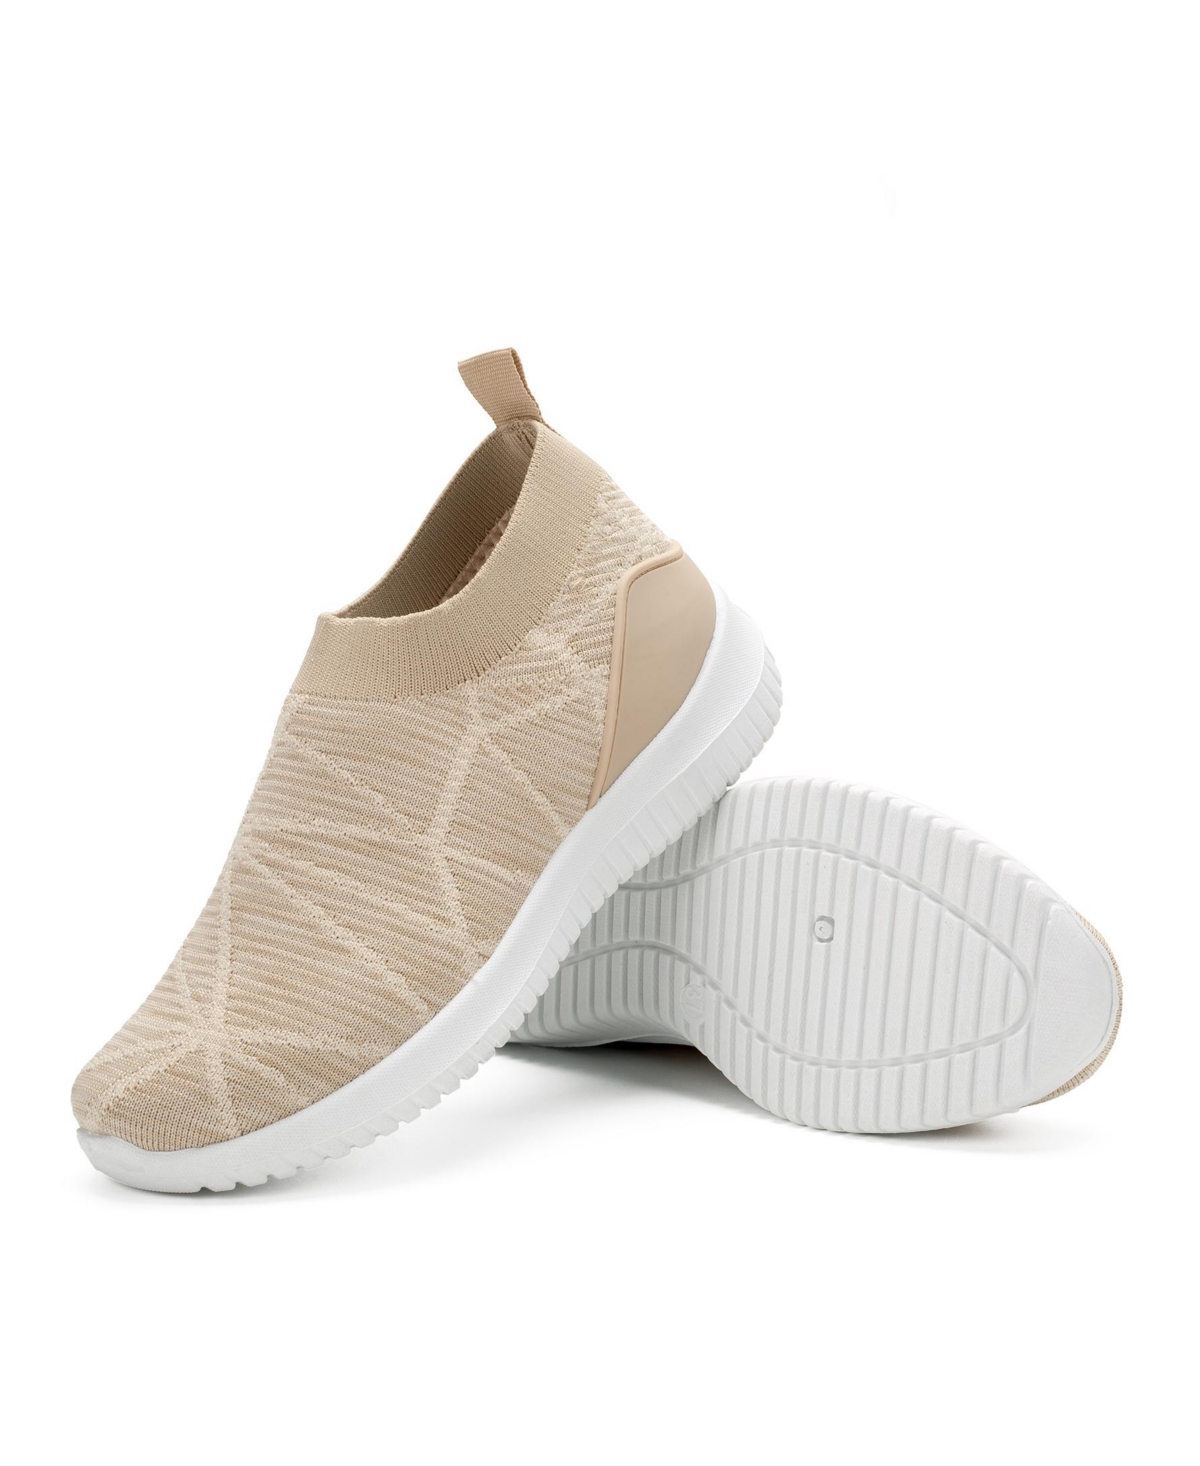 Mio Marino's Women's Casual Slip On Sneakers with Breathable Mesh - White